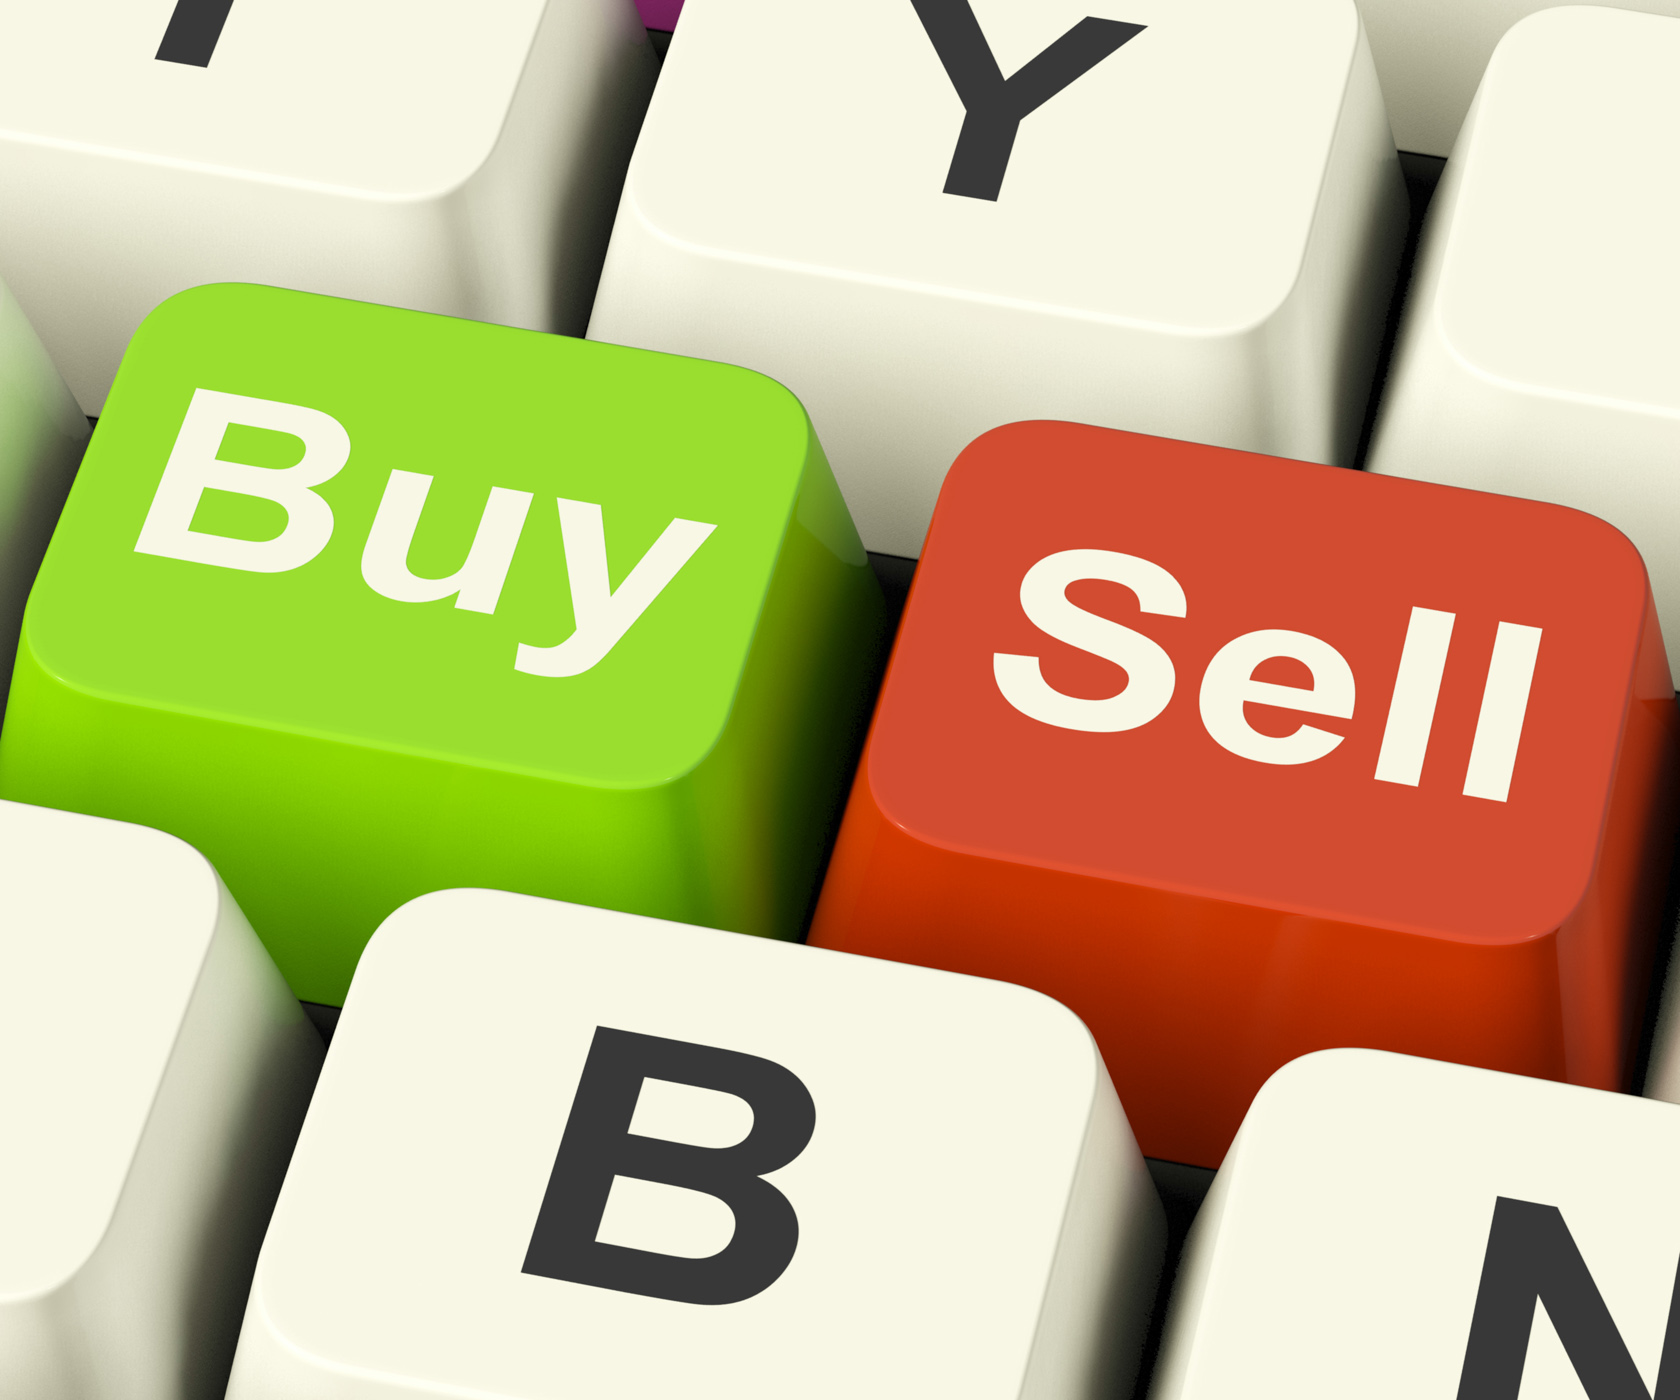 Buy and sell keys representing business trade or stocks online photo